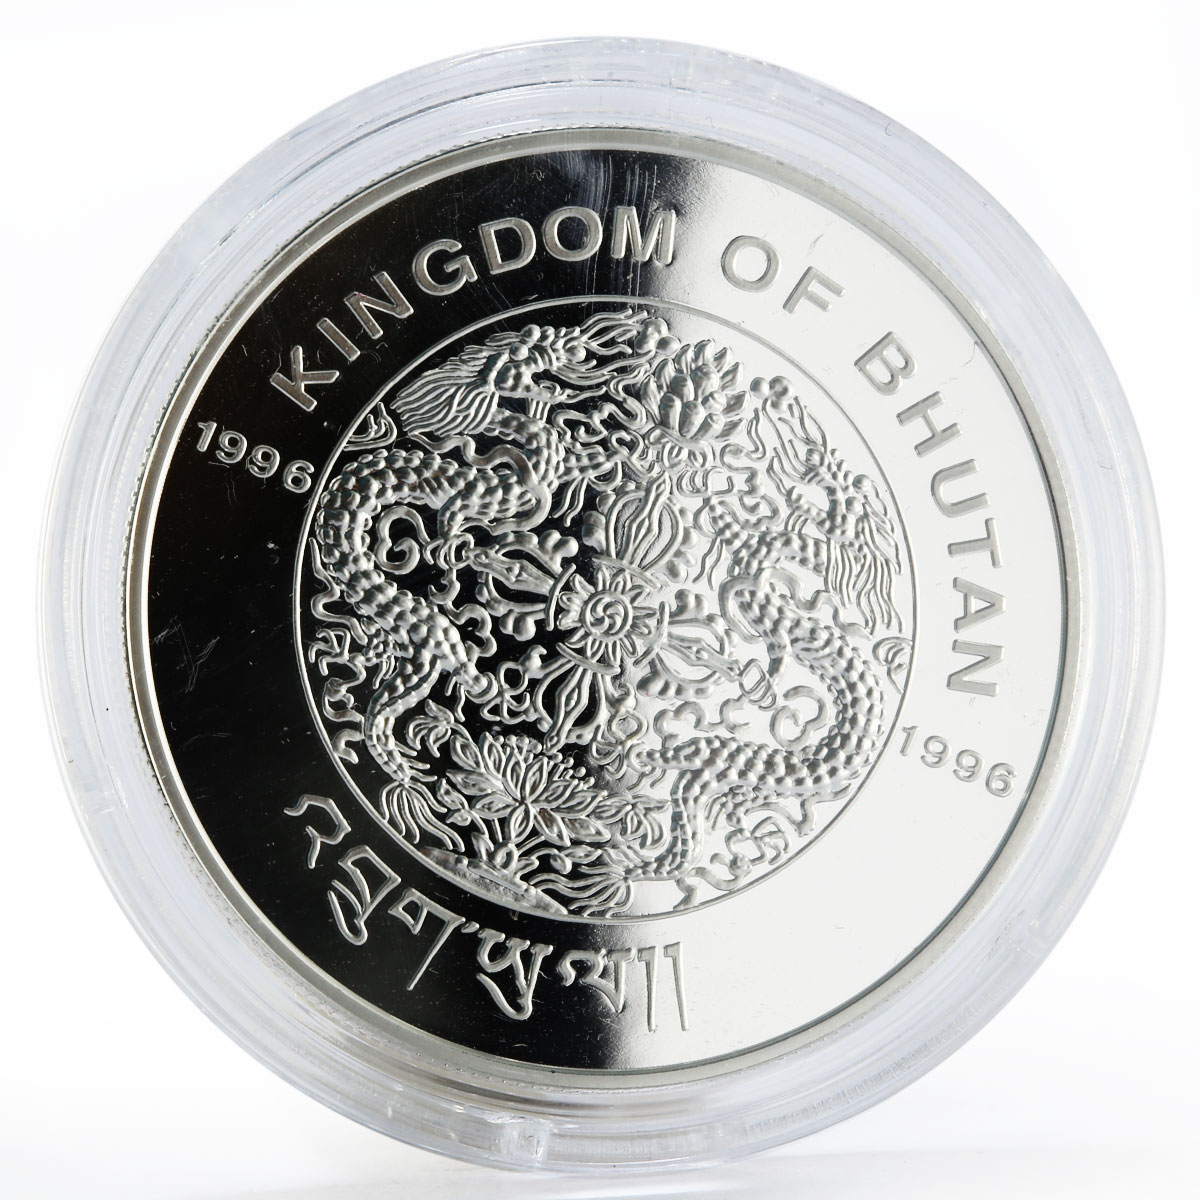 Bhutan 300 ngultrums Year of the Dragon proof silver coin 1996